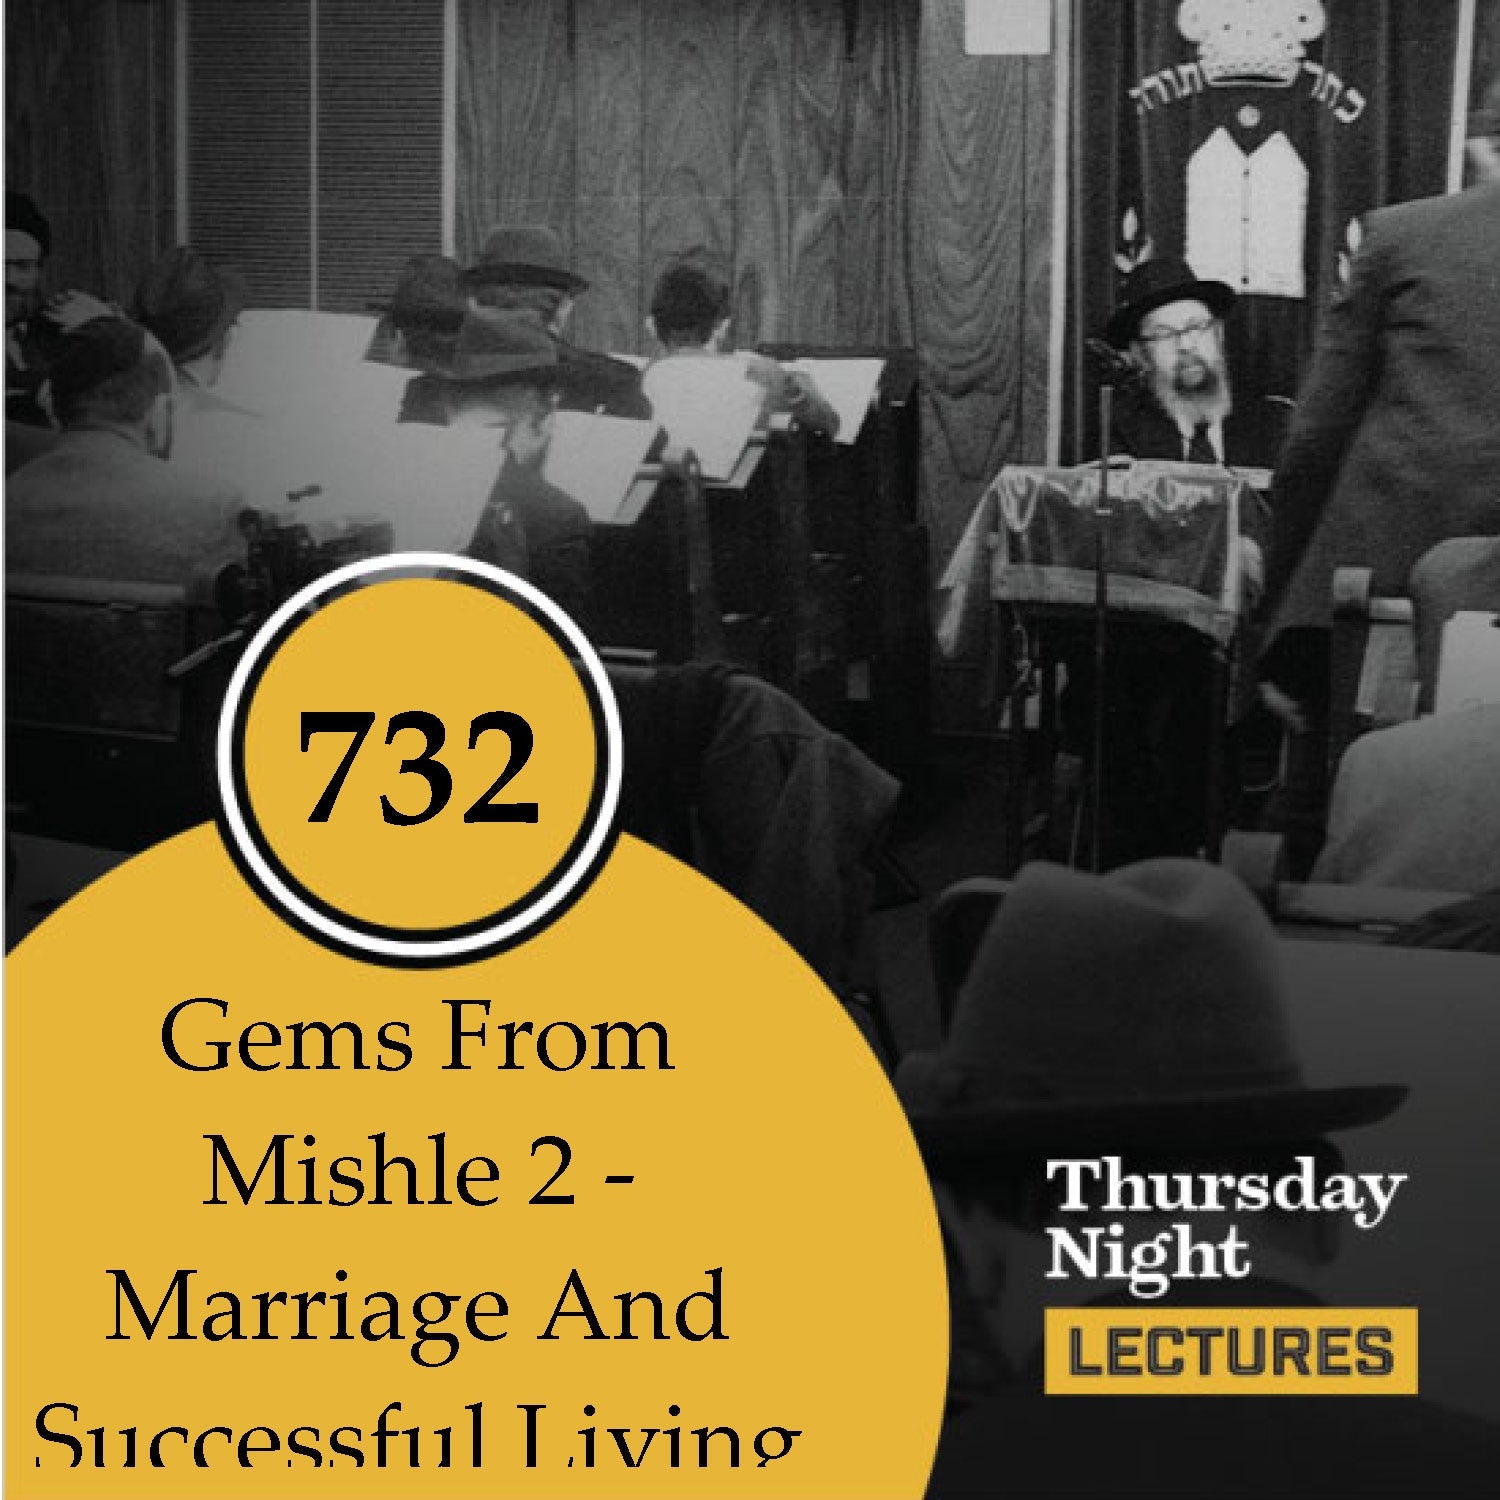 732 - Gems From Mishle 2 - Marriage And Successful Living